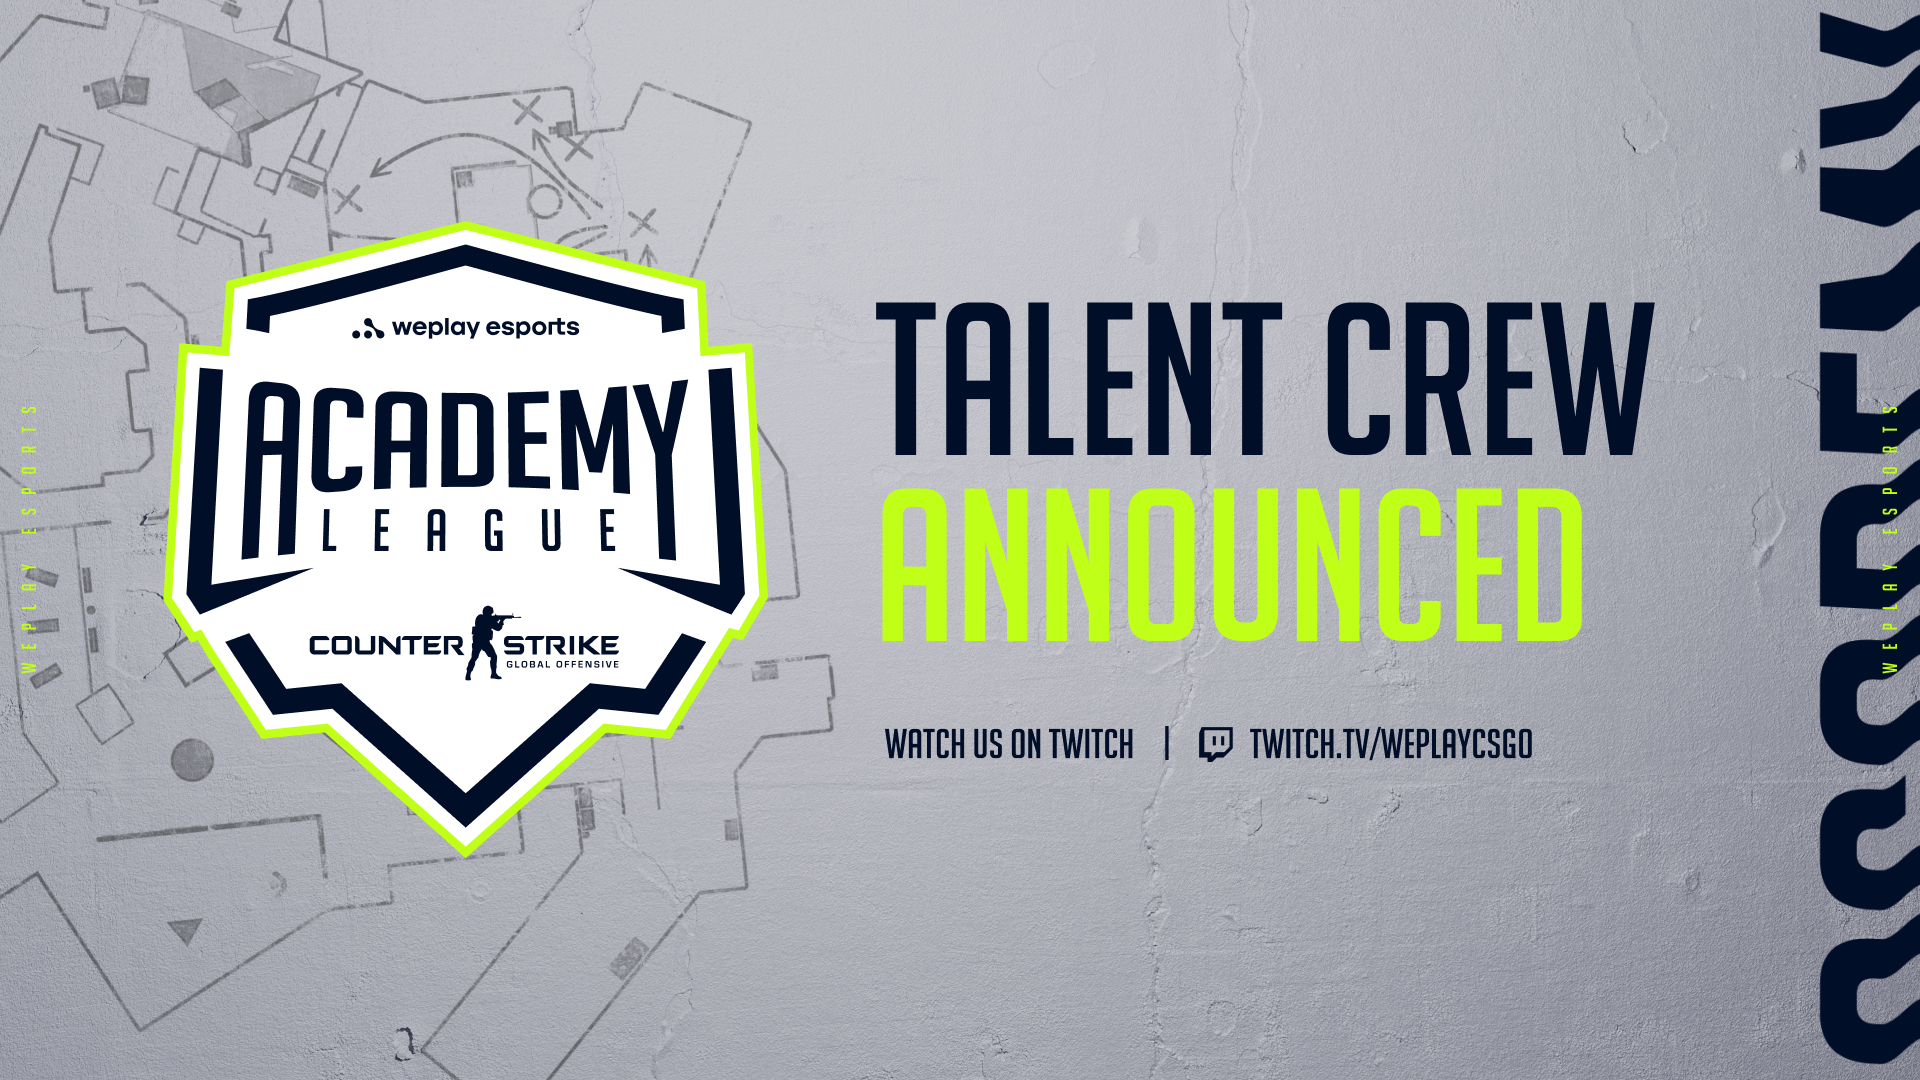 meet-the-talents-of-the-weplay-academy-league-season-3!